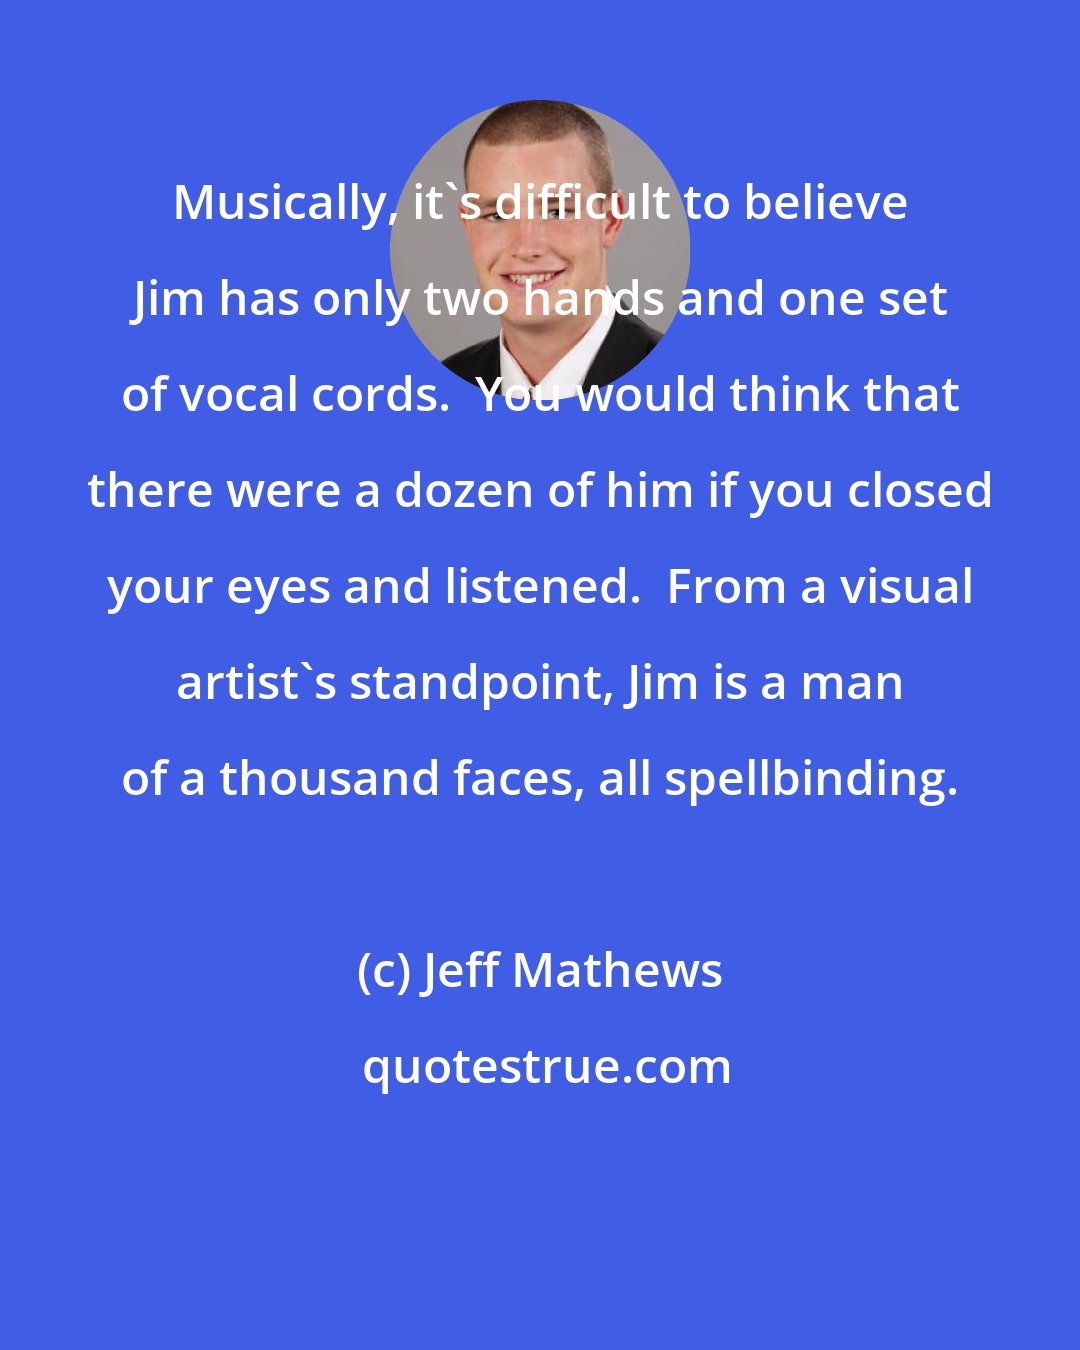 Jeff Mathews: Musically, it's difficult to believe Jim has only two hands and one set of vocal cords.  You would think that there were a dozen of him if you closed your eyes and listened.  From a visual artist's standpoint, Jim is a man of a thousand faces, all spellbinding.